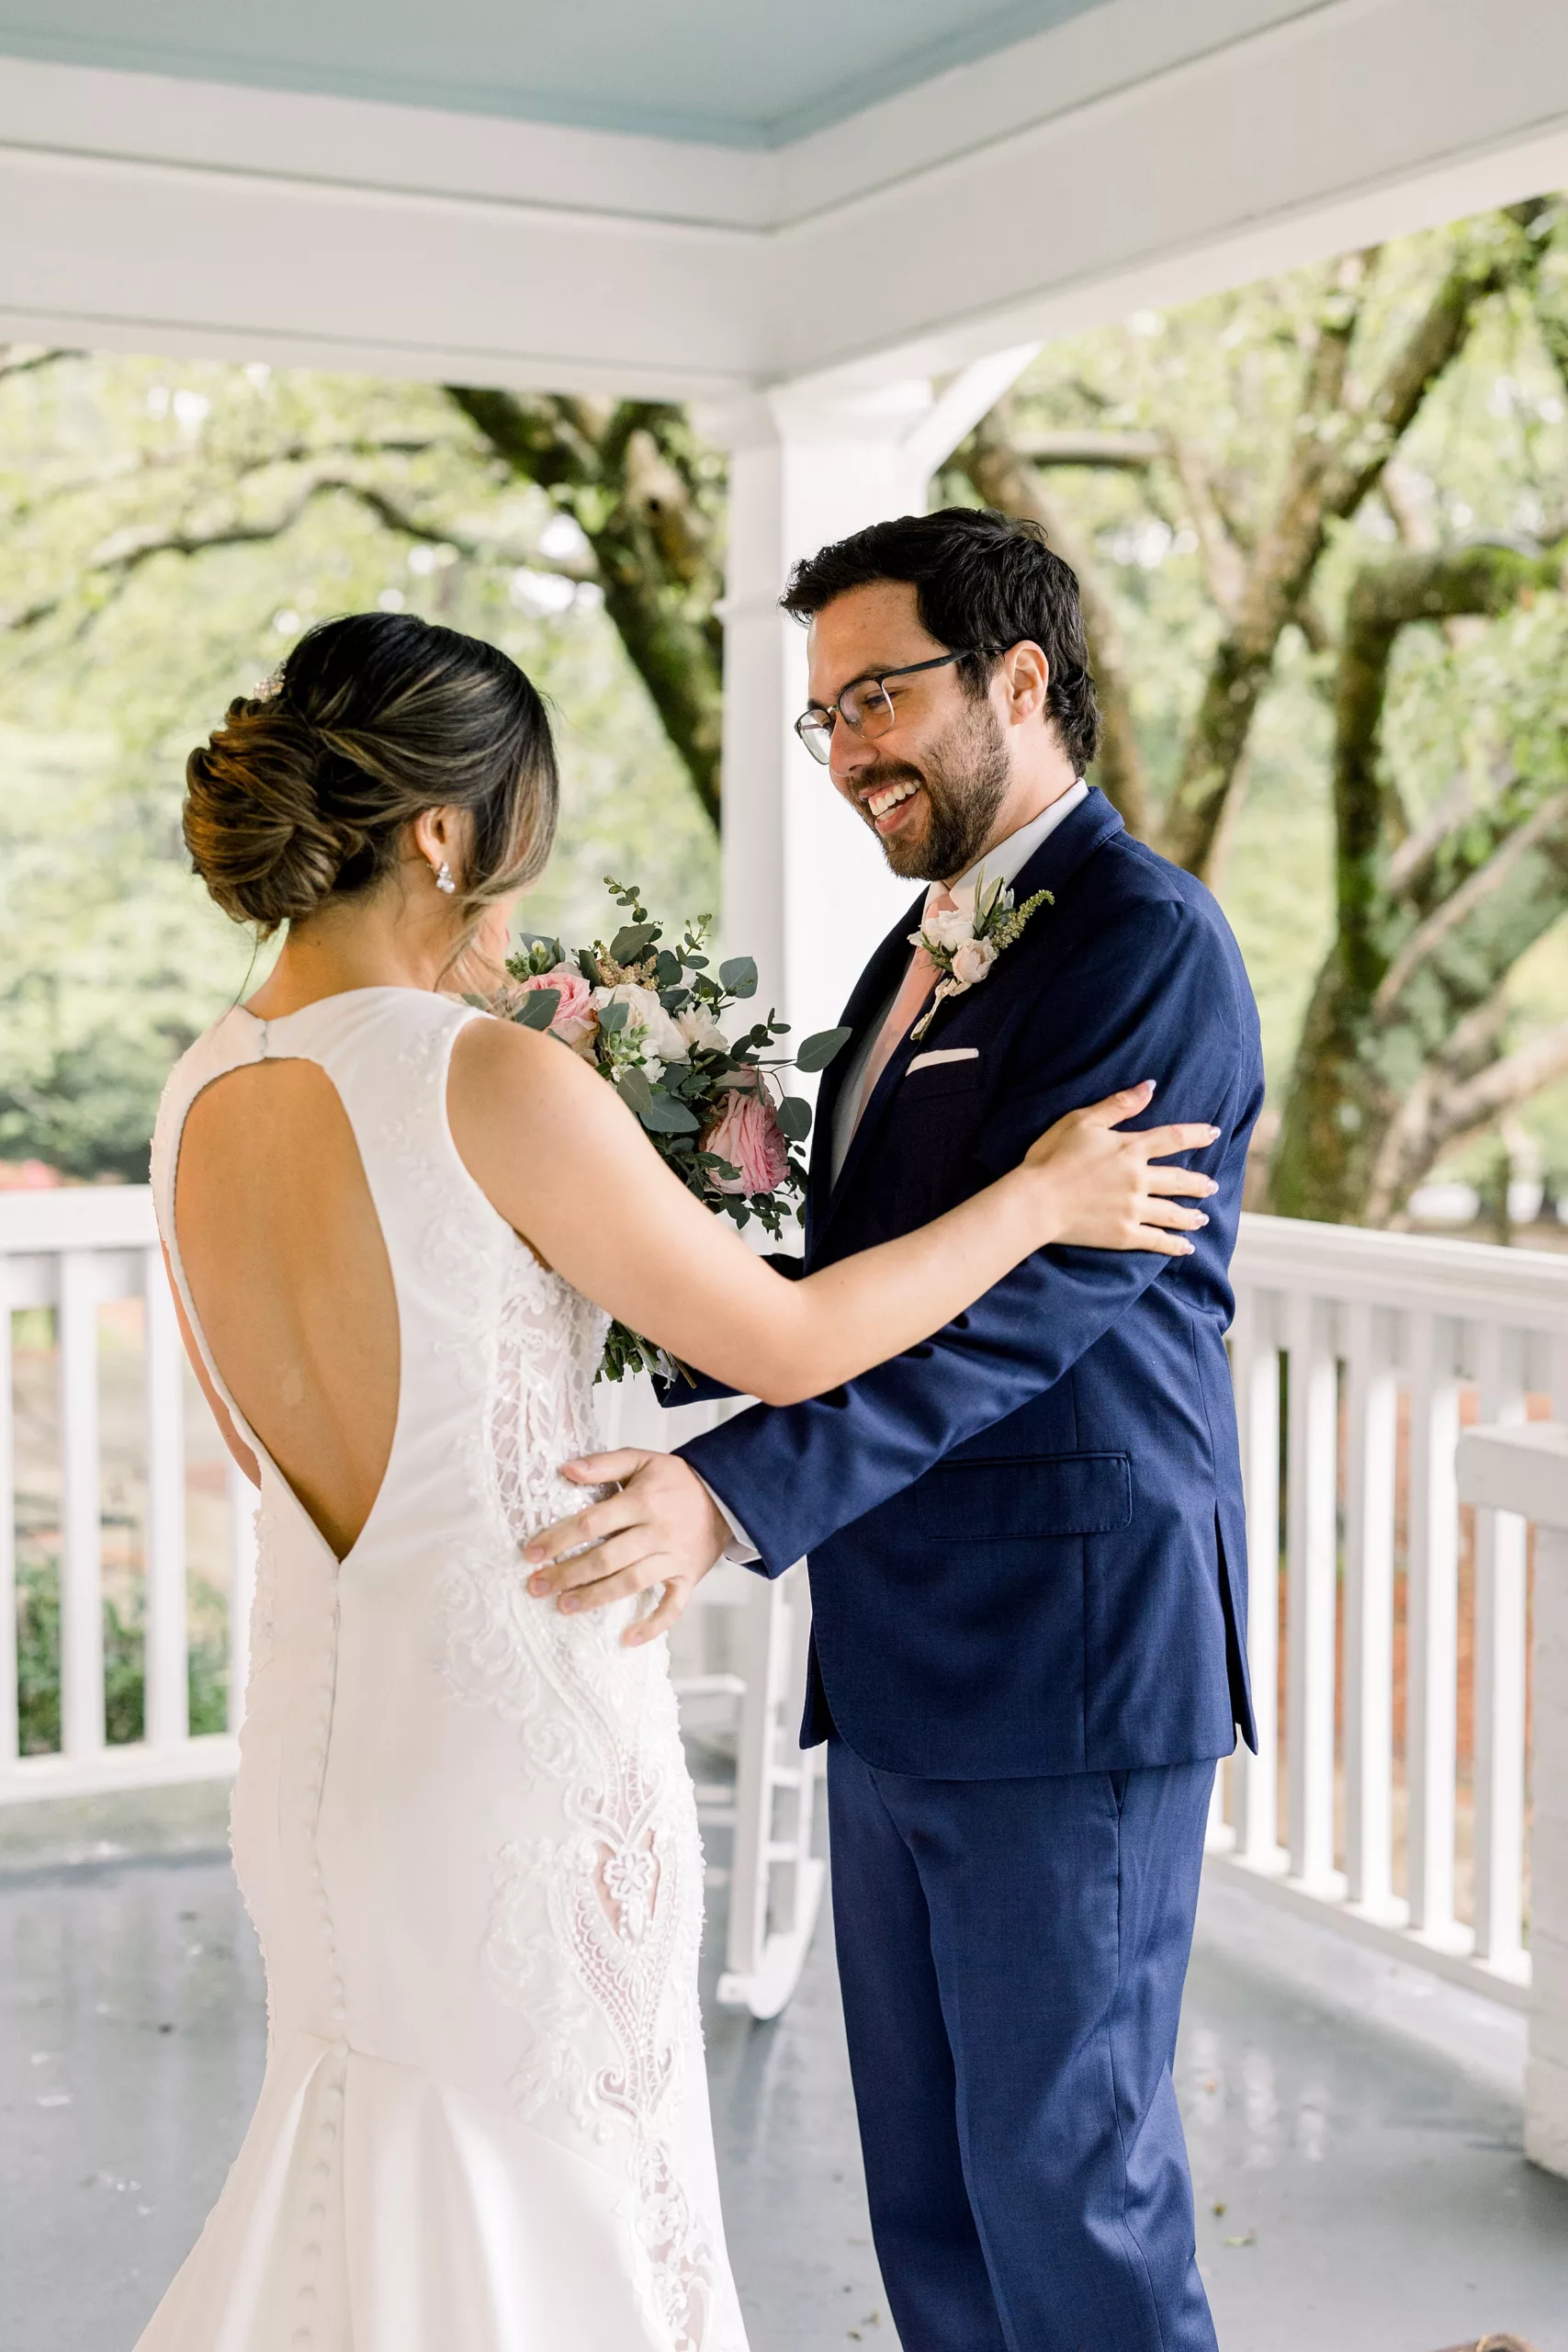 A bride and groom lean in for a big hug while smiling and standing on a porch in a blue suit and white lace embroidered dress during their first look wedding